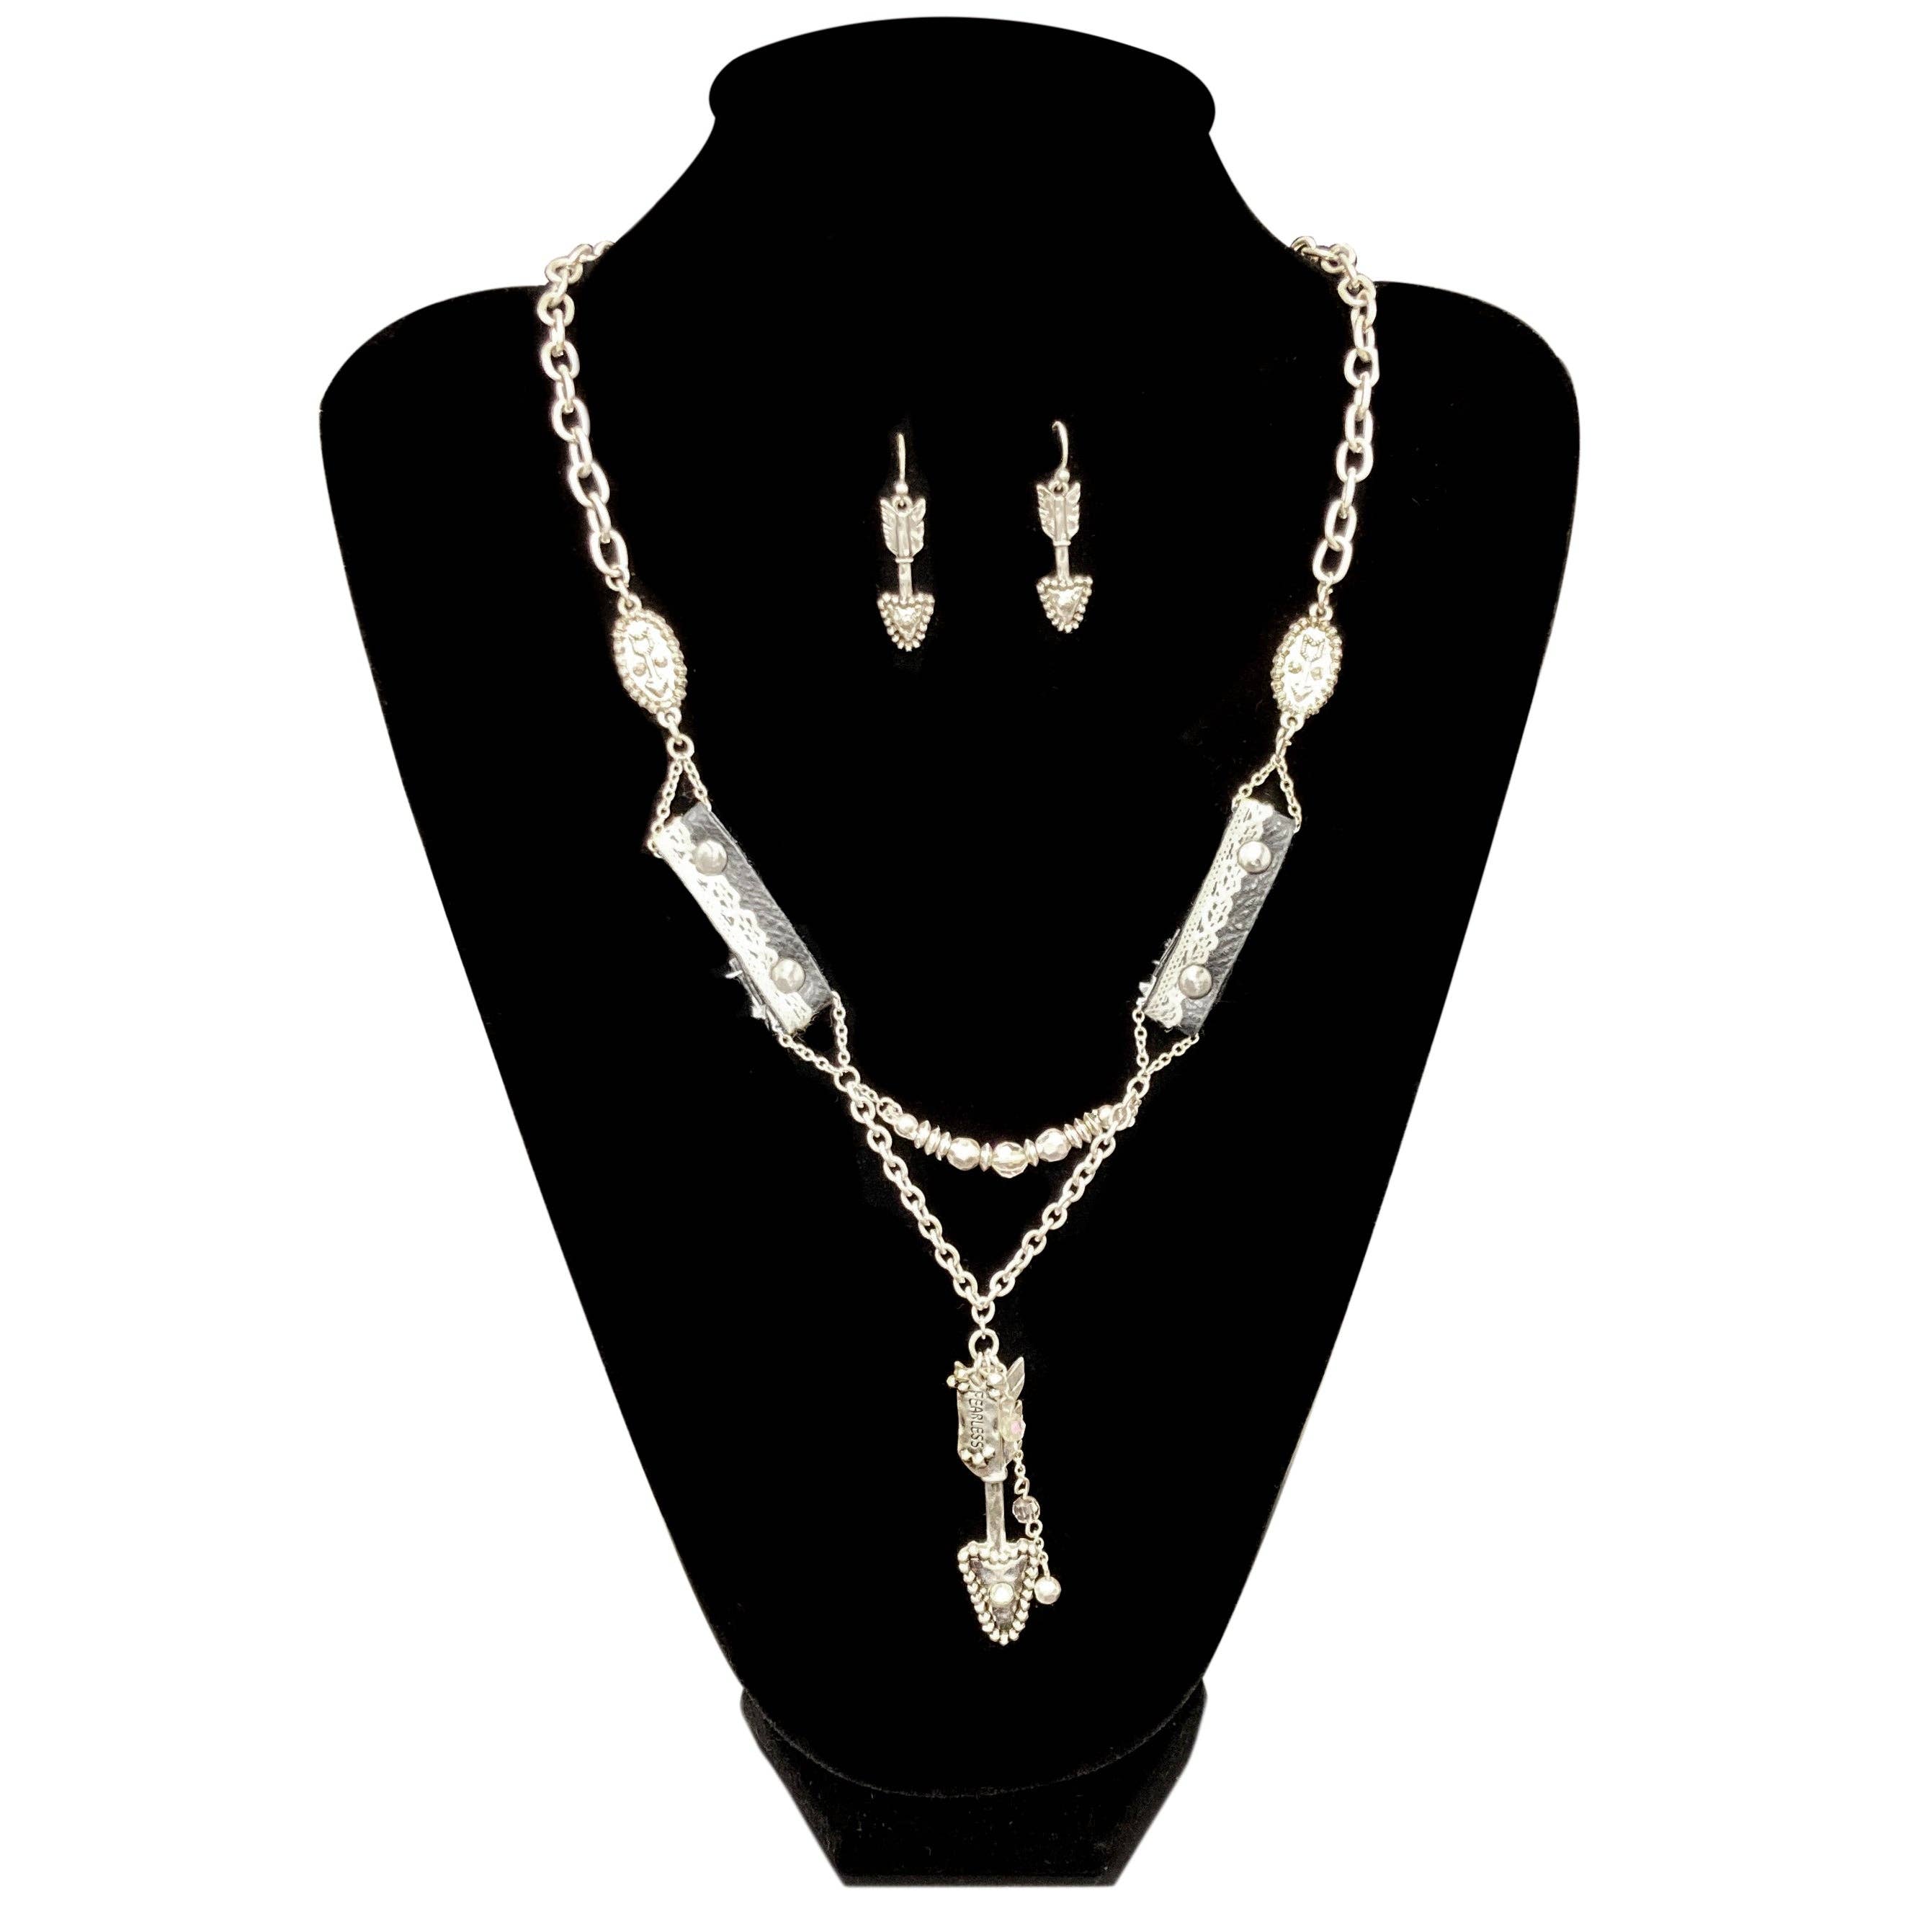 Necklace Set: Arrow Fearless Lace Rustic Long Necklace with Earrings